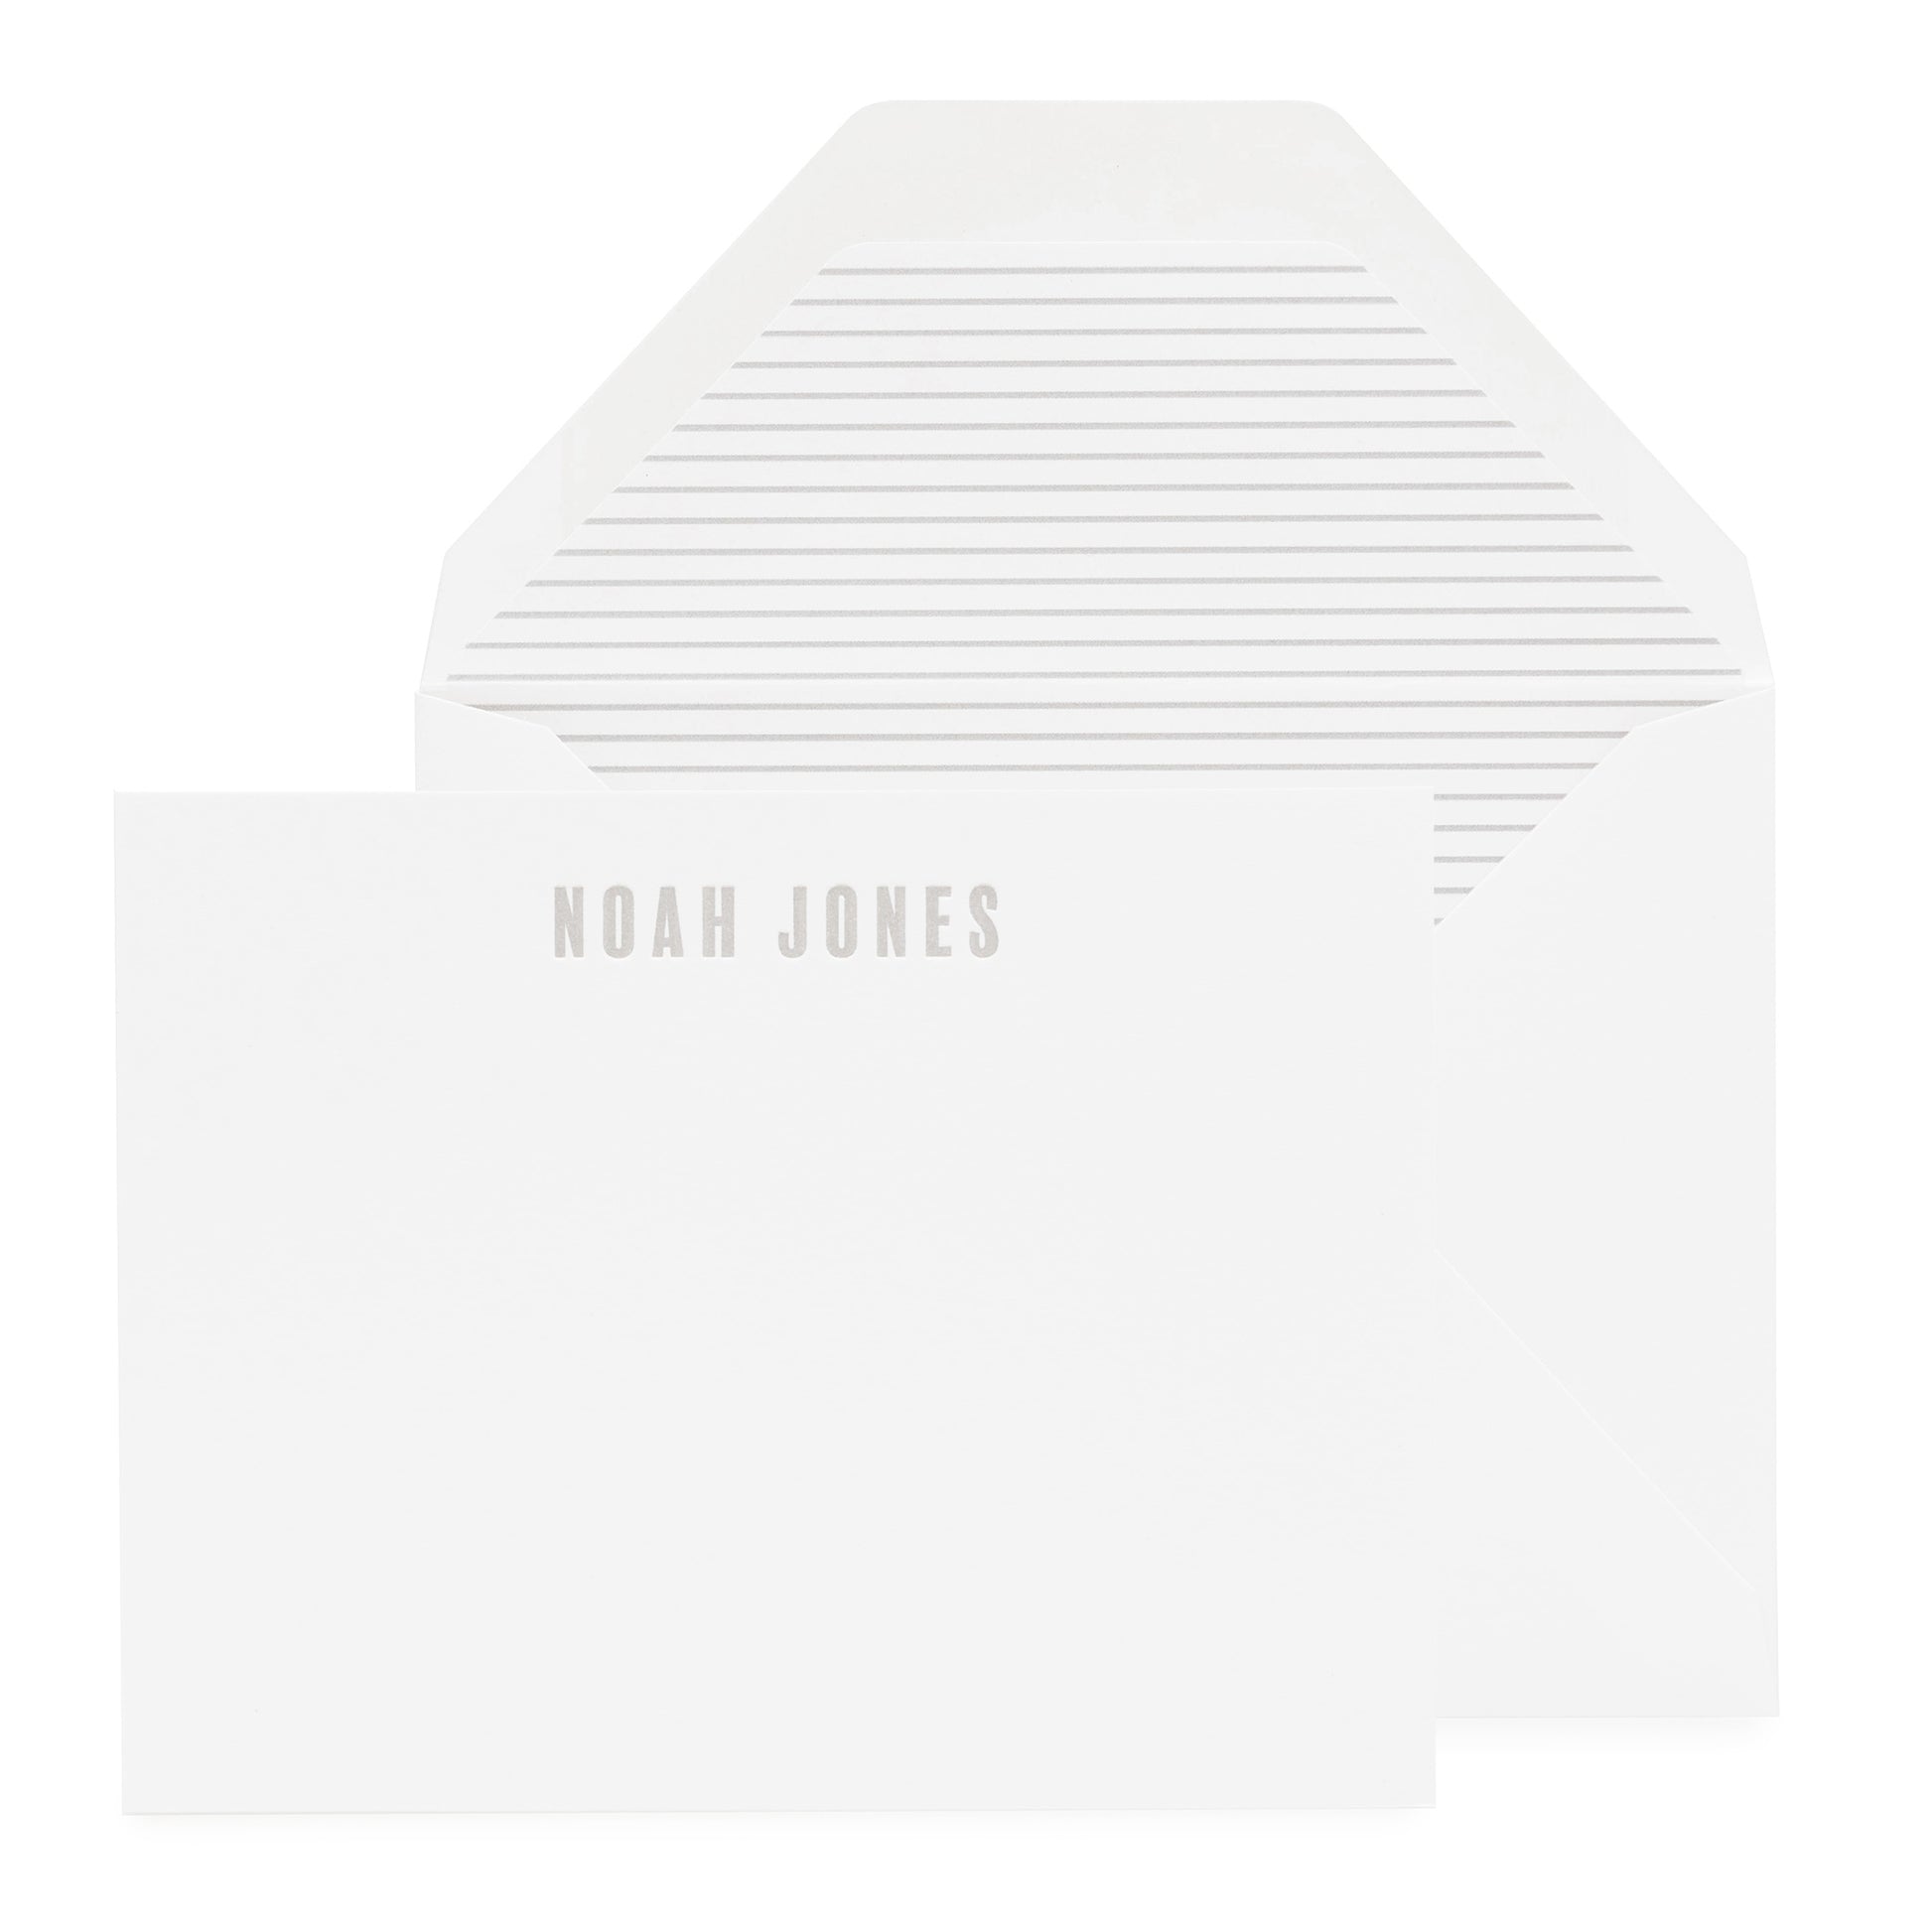 Custom stationery with grey ink on white card showing a stripe liner